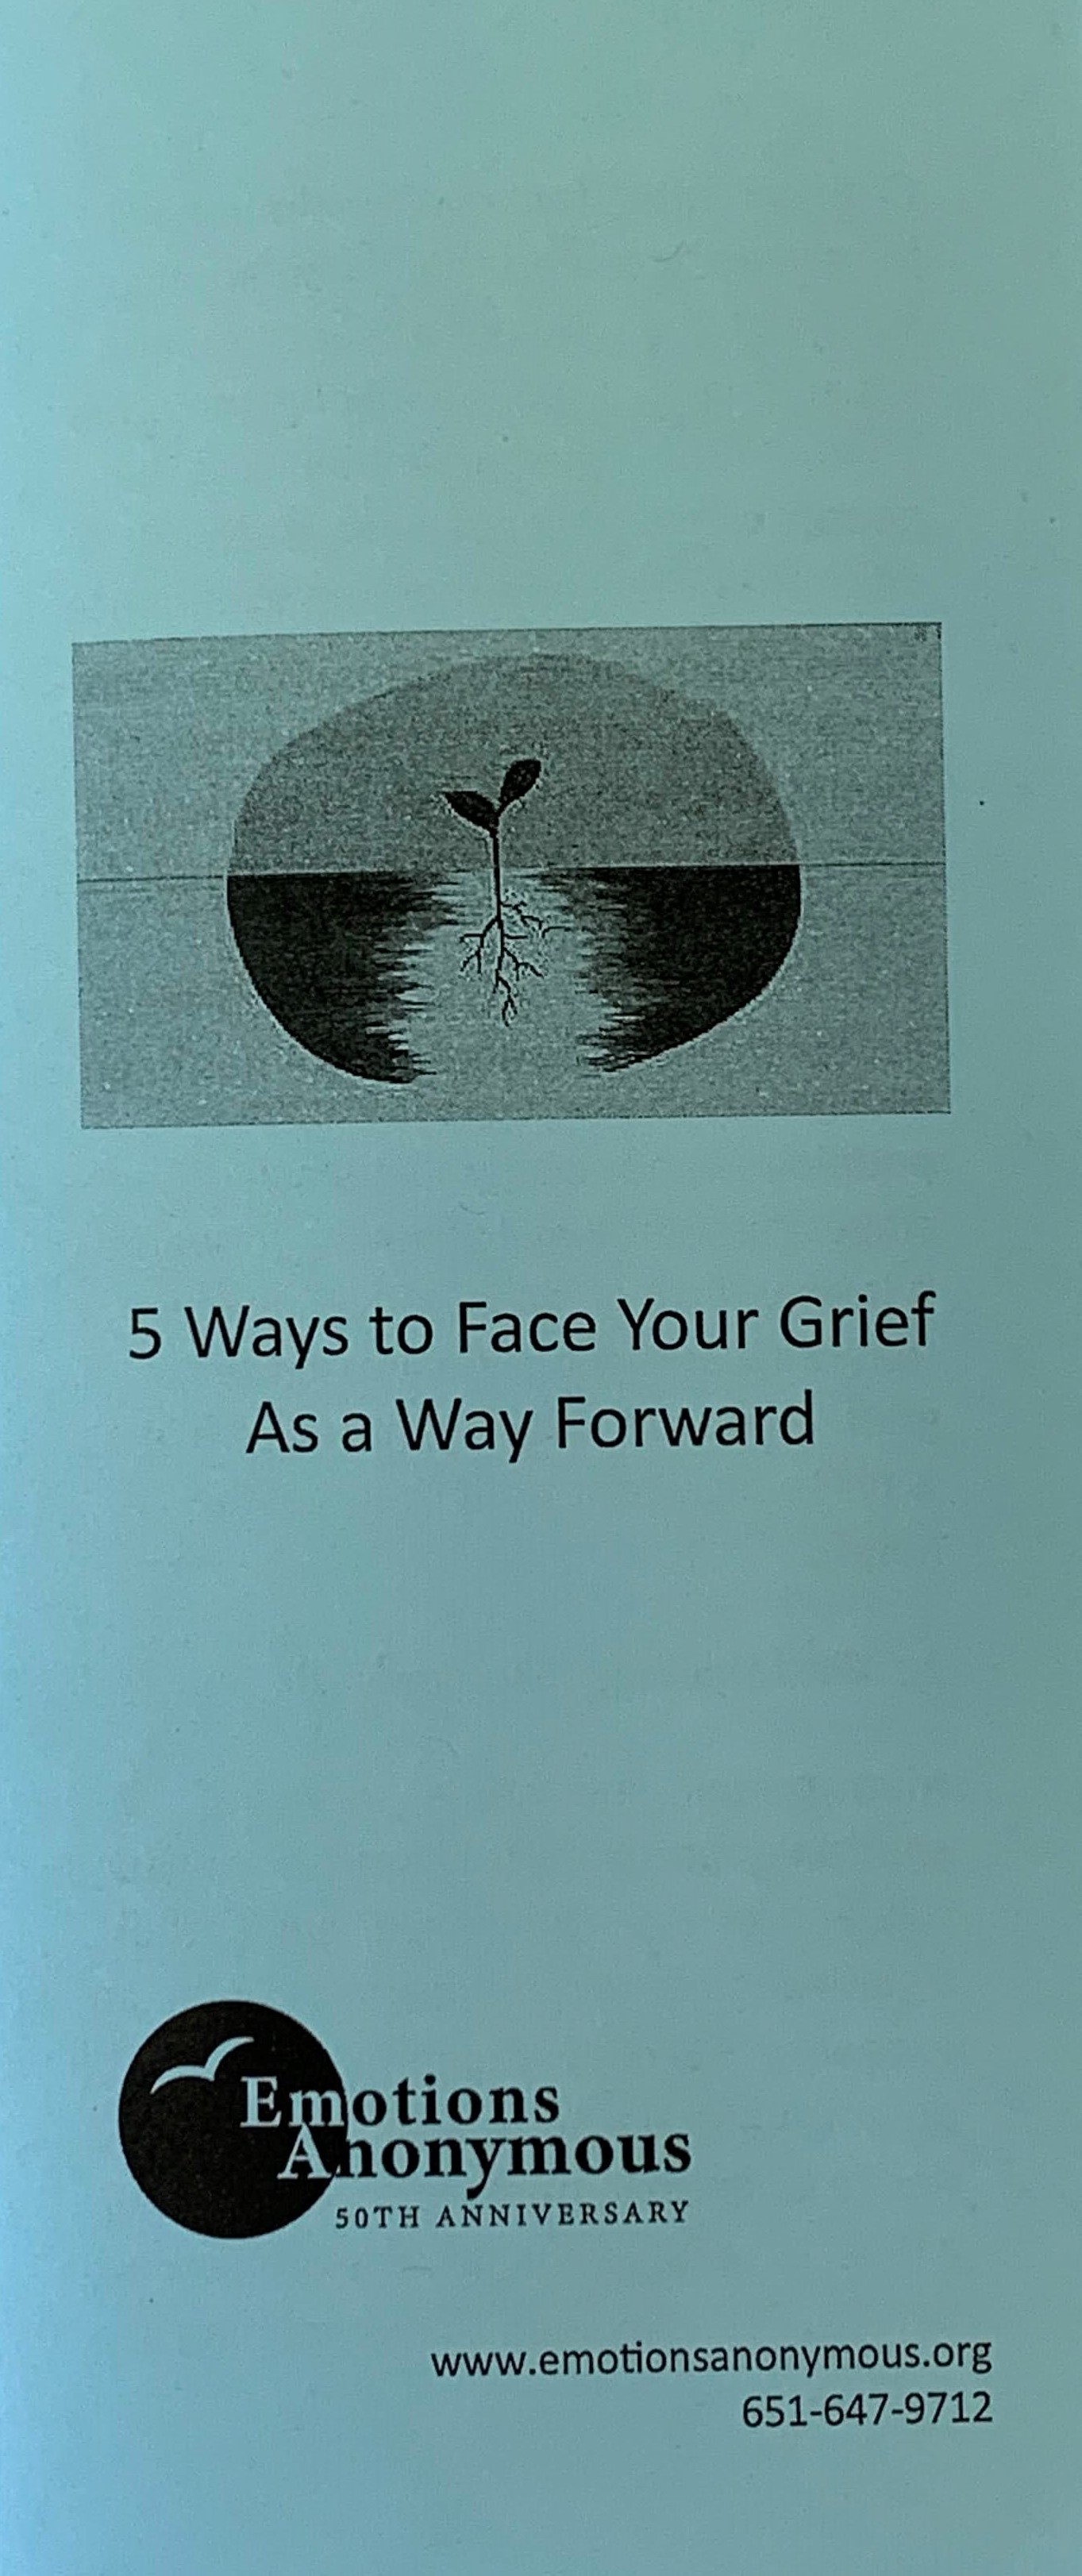 Item #93 — "5 Ways to Face Your Grief As a Way Forward" Pamphlet (New in 2021)